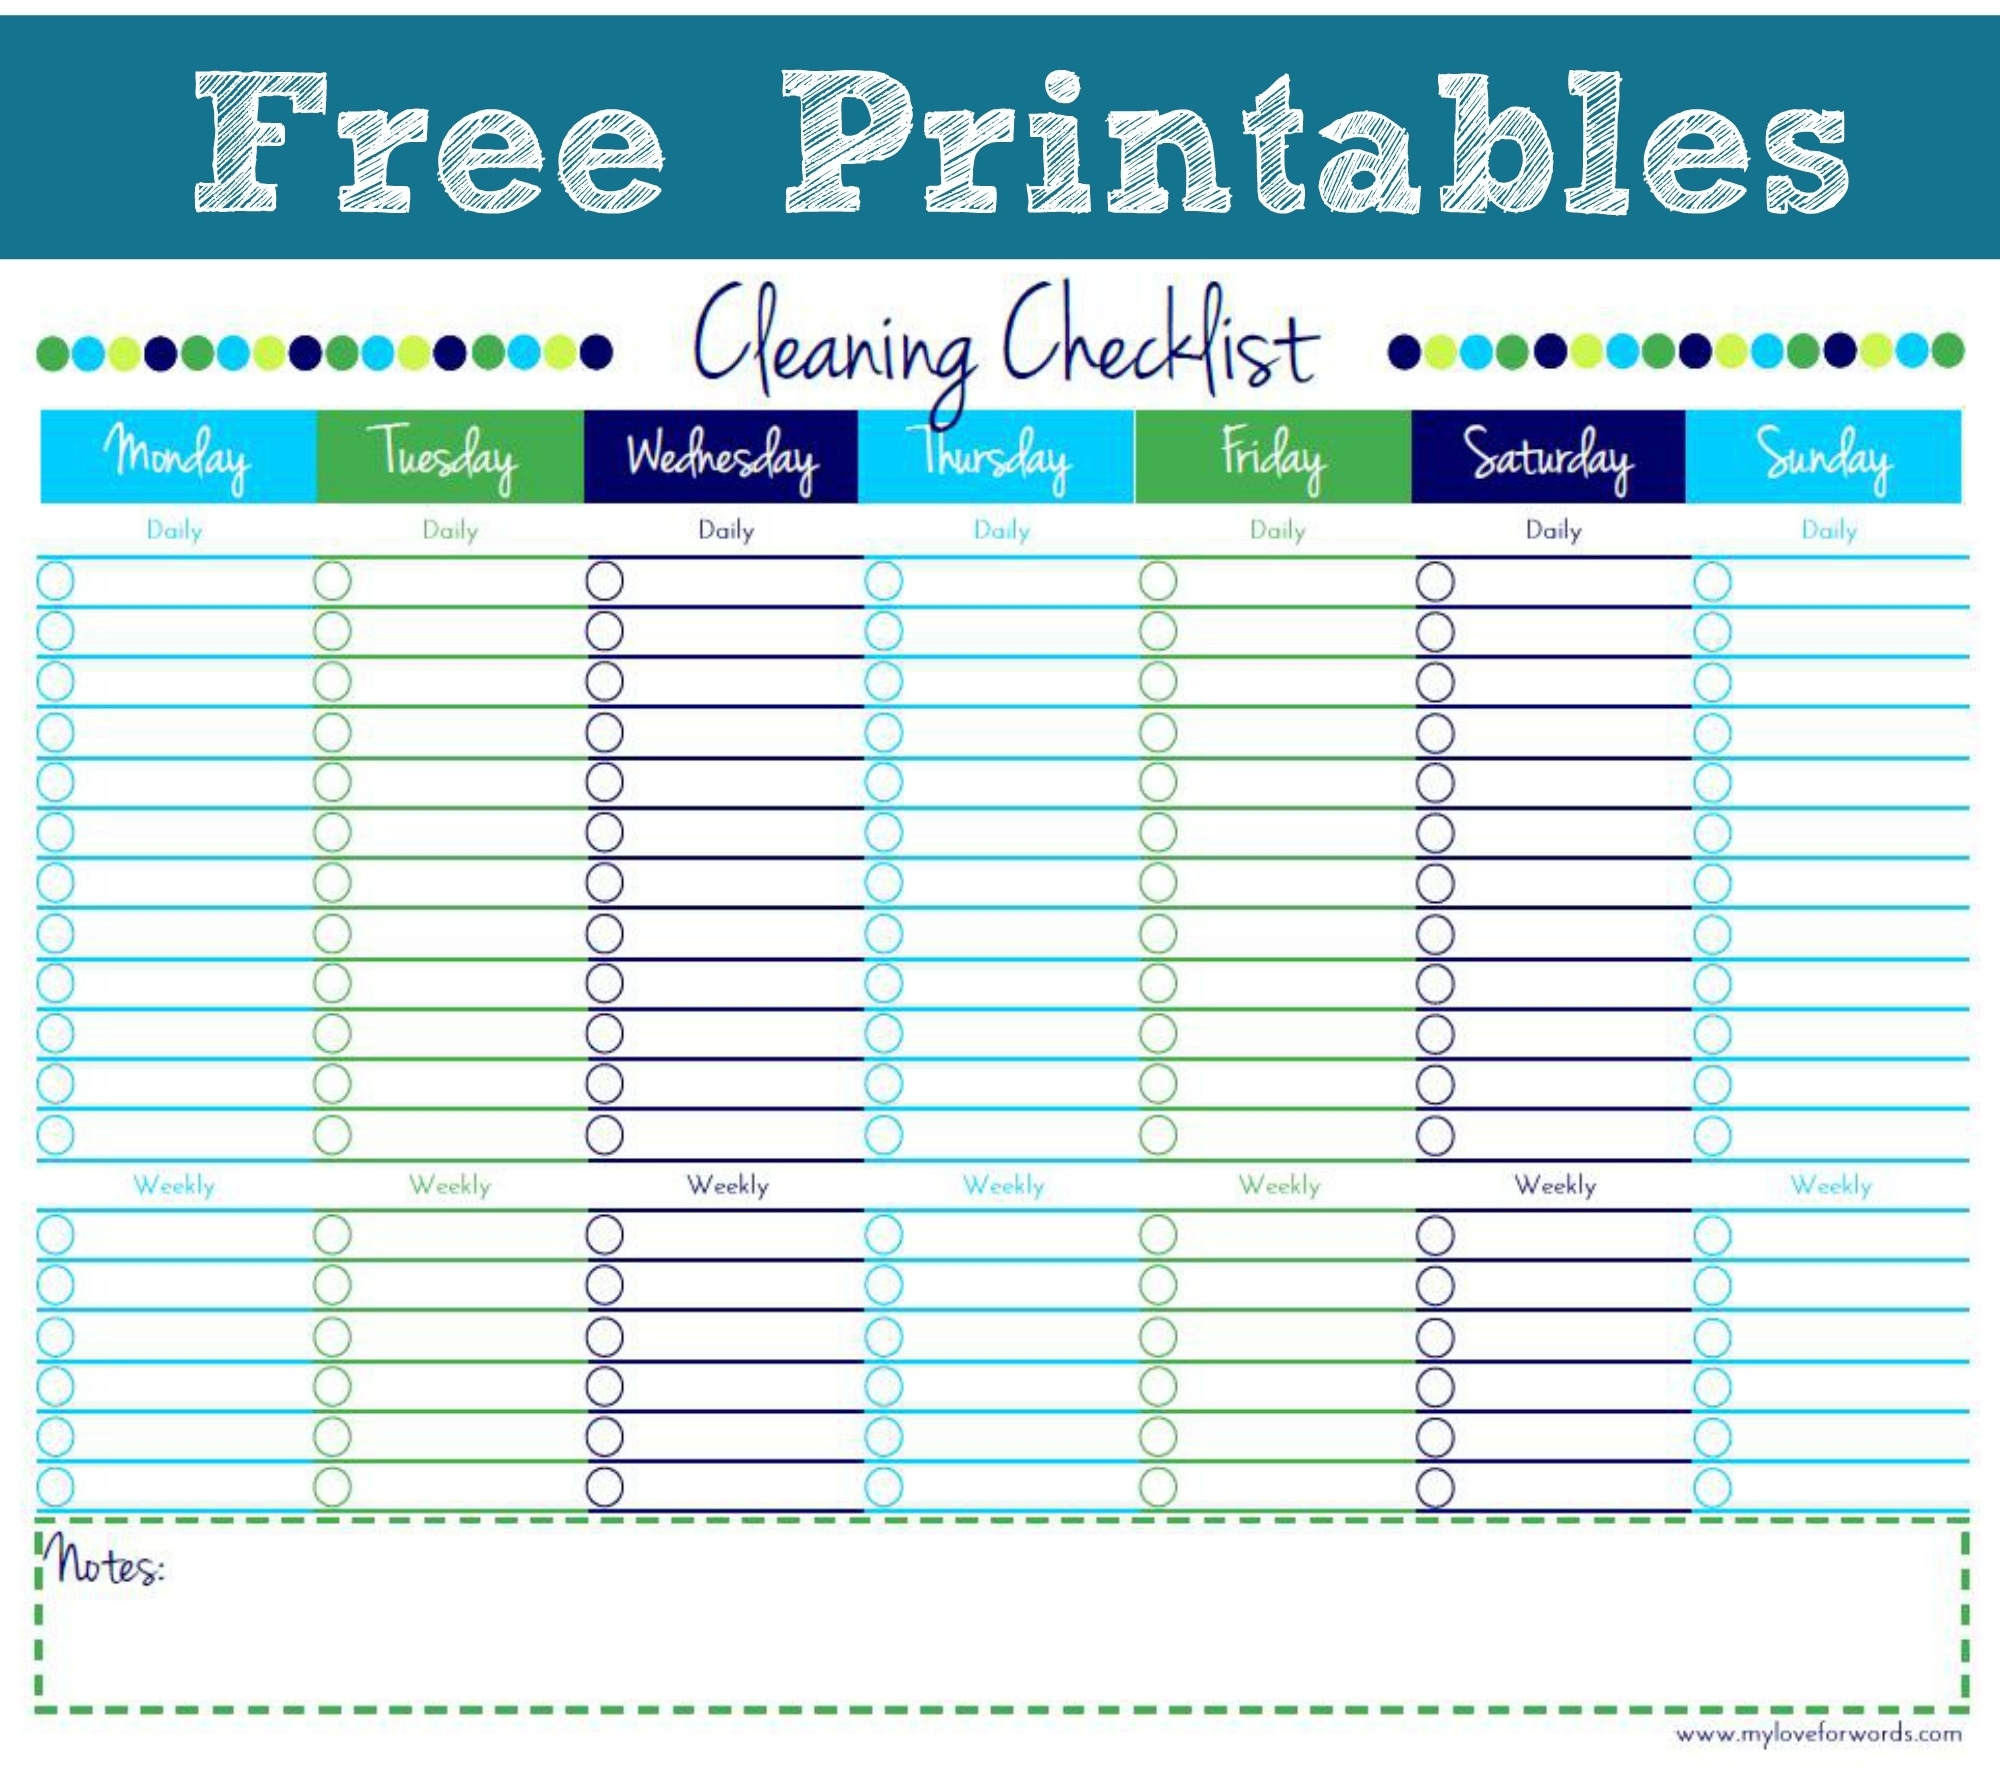 Cleaning Checklist {Free Printable} with Monday Through Friday Checklist Free Printable